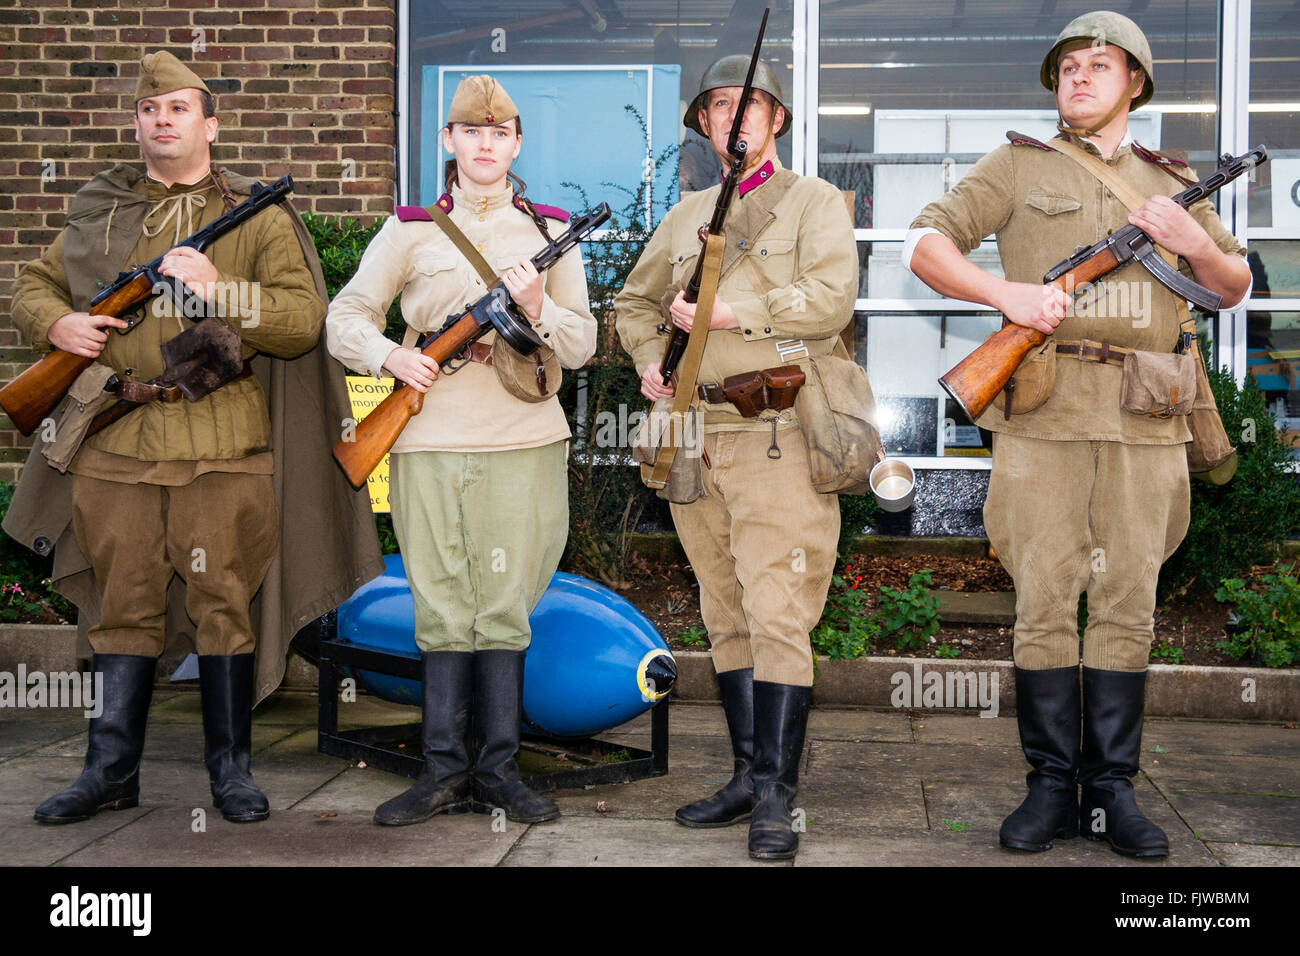 World War two Re-enactment. Four Russian soldiers standing facing viewer, posing, three men, one woman holding rifles and burp-gun, PPSh-41. Stock Photo